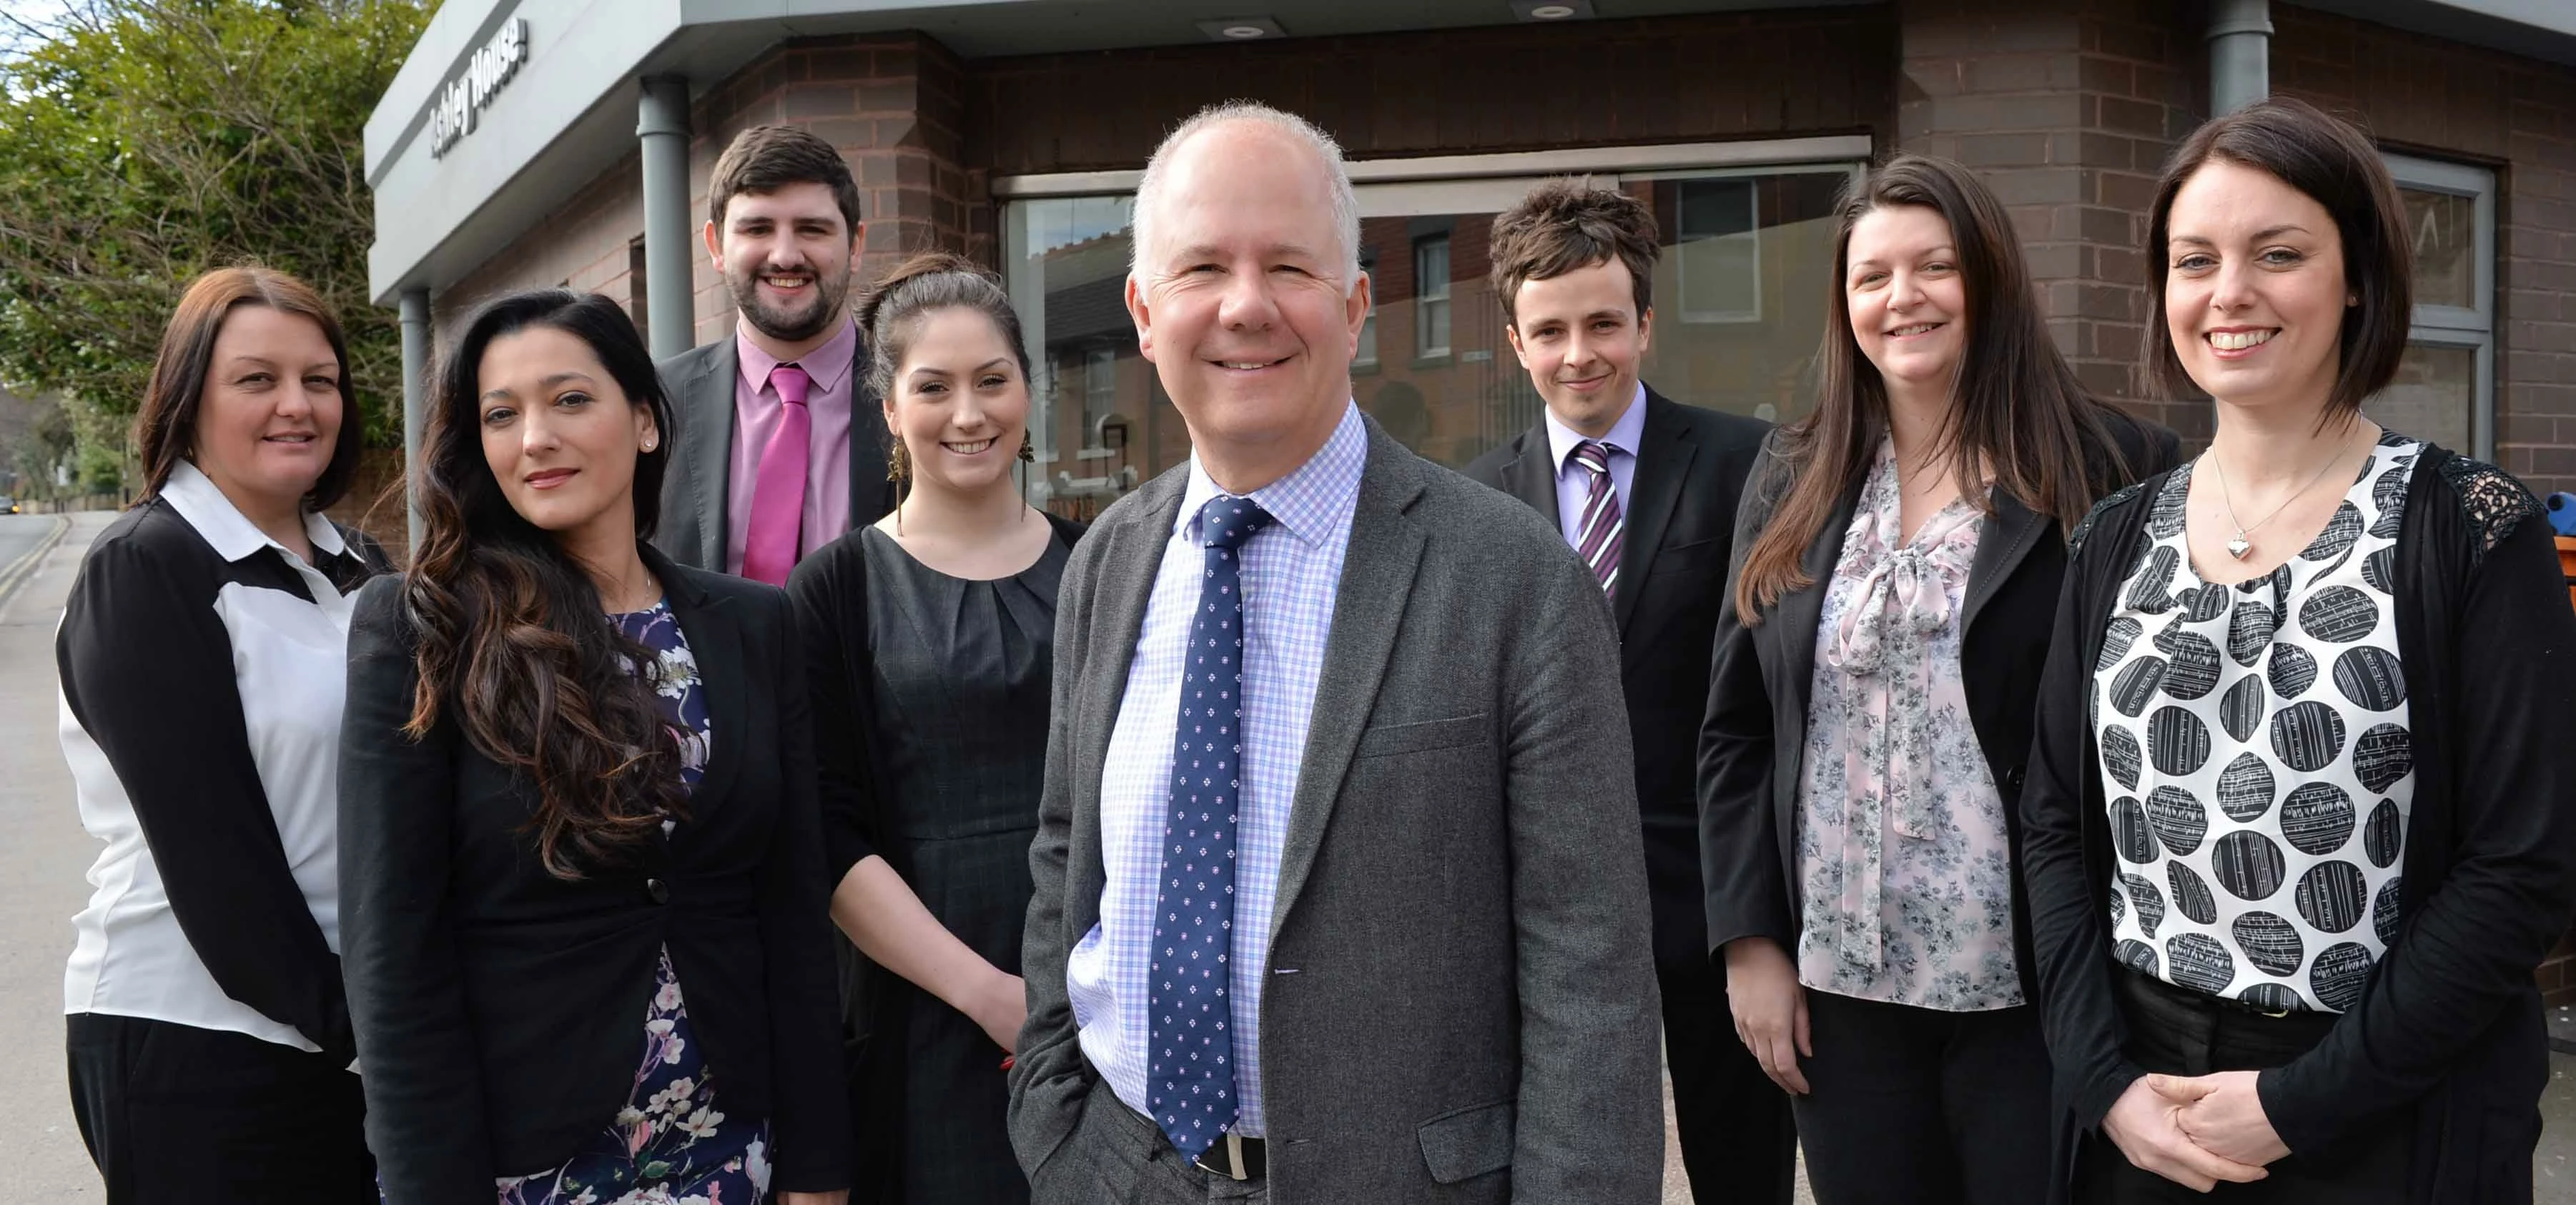 The new team at Jefferies Solicitors, with Michael Jefferies, managing director